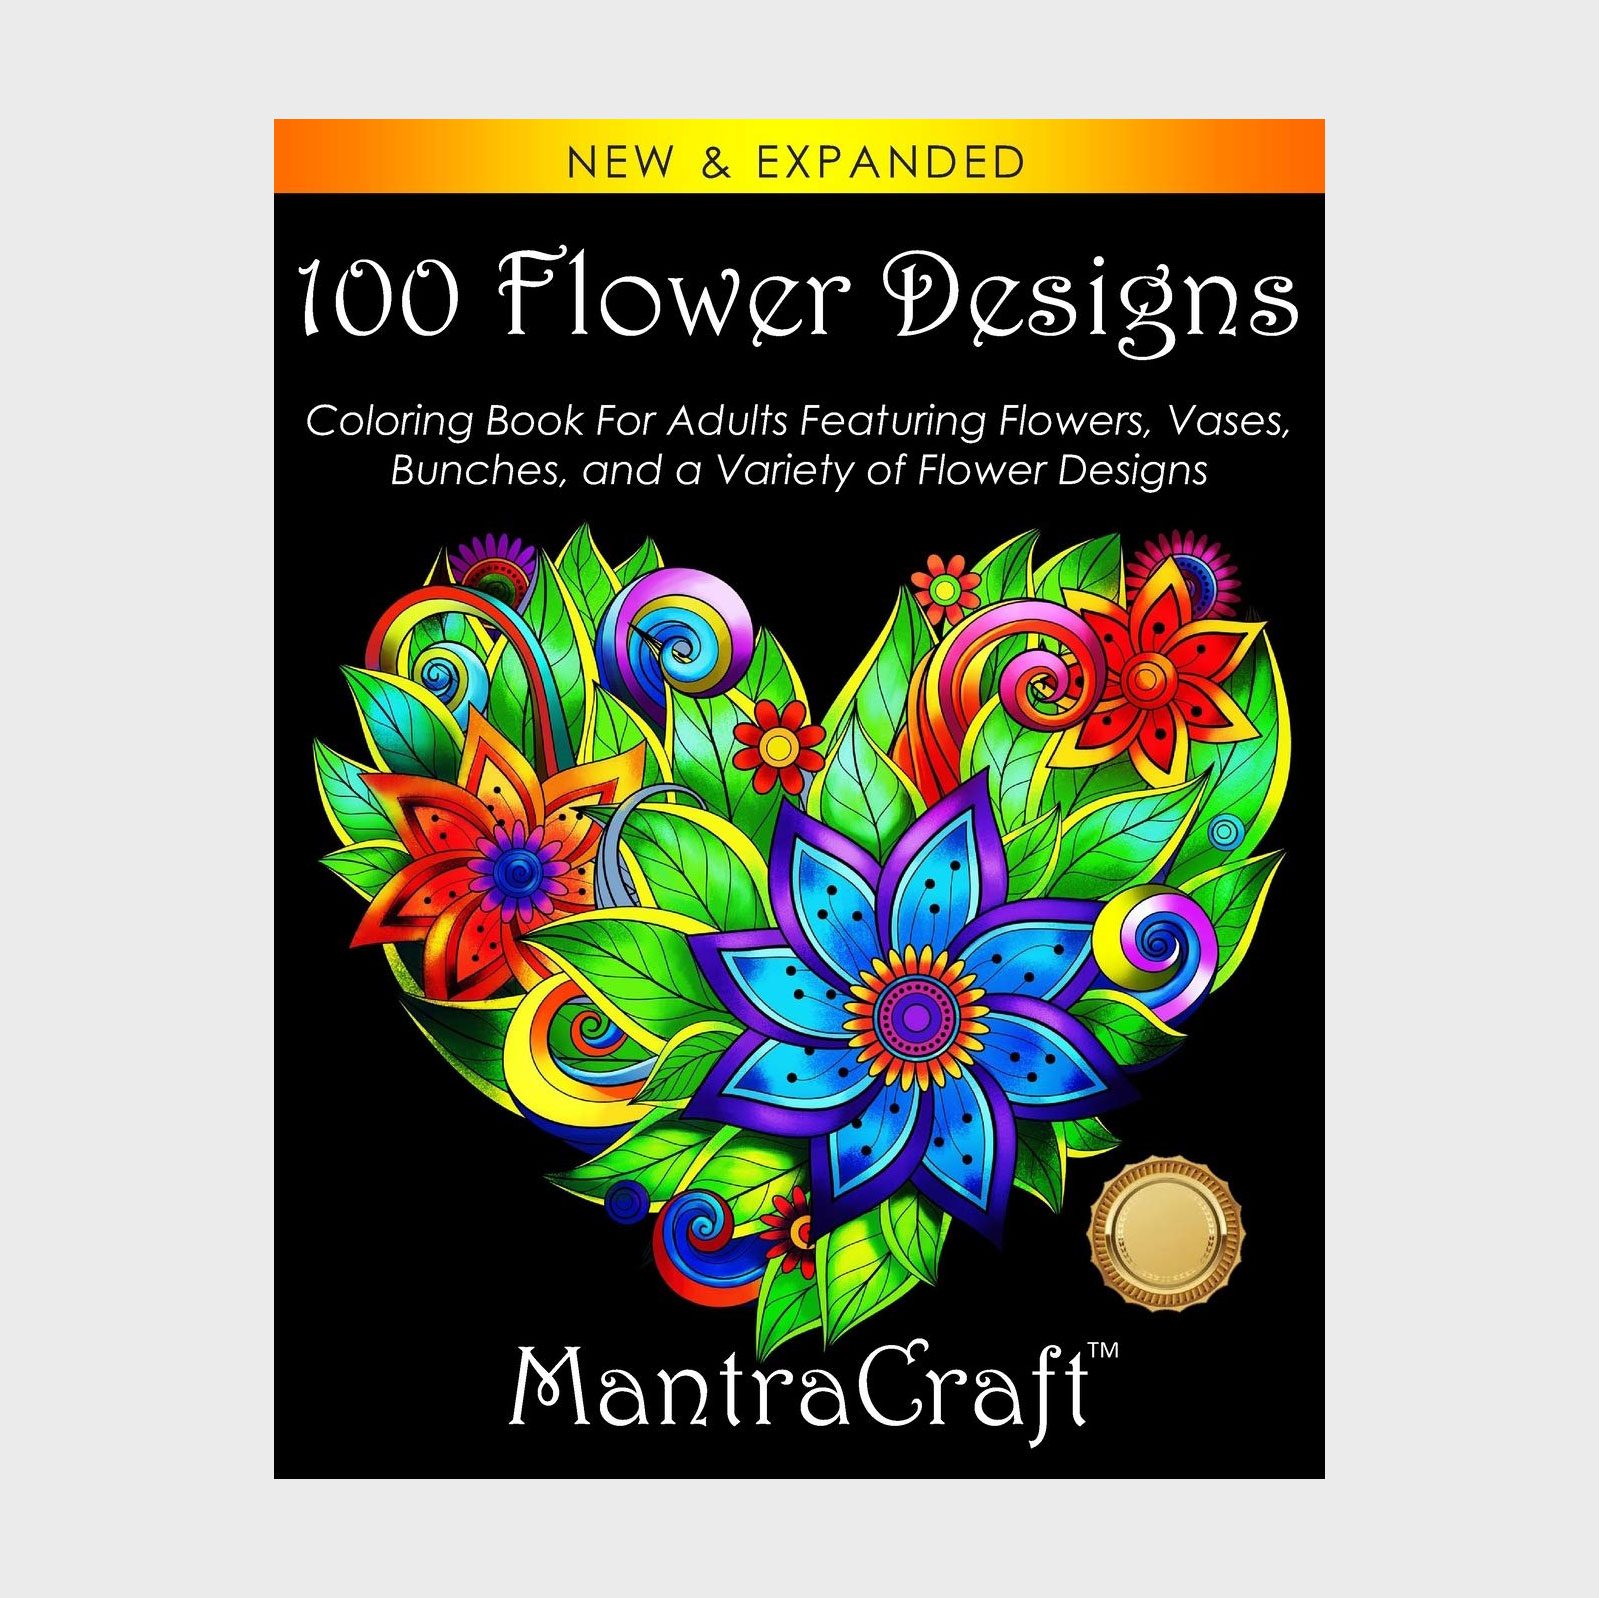 More Than 1000 Adult Coloring Pages, Adult Coloring Book, Mandala Coloring  Therapy, Books for Adults 